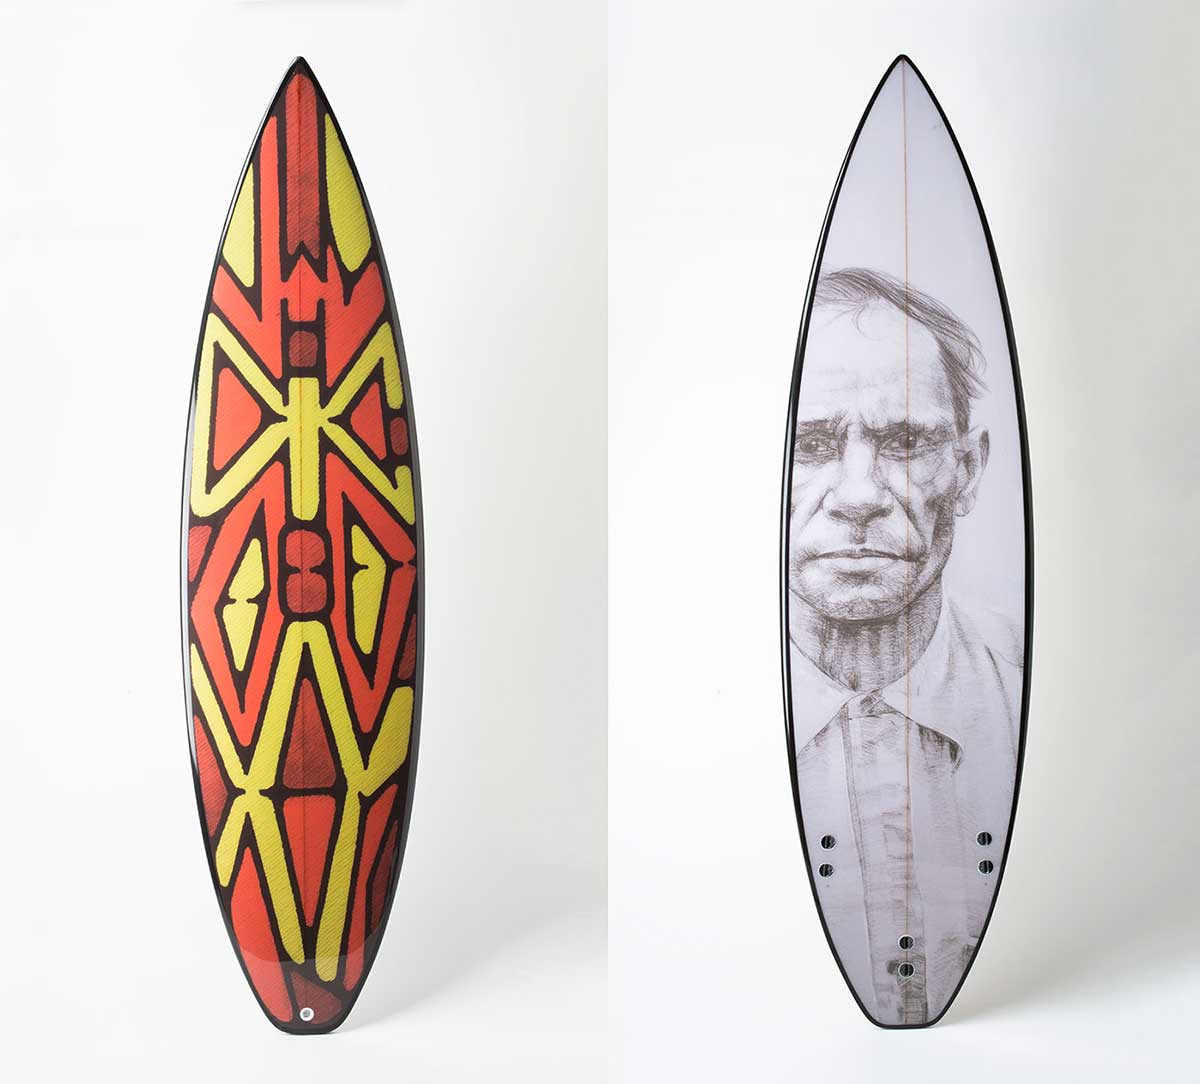 From left to right of the image, front and back of a surfboard and an etching resembling a shield. - click to view larger image